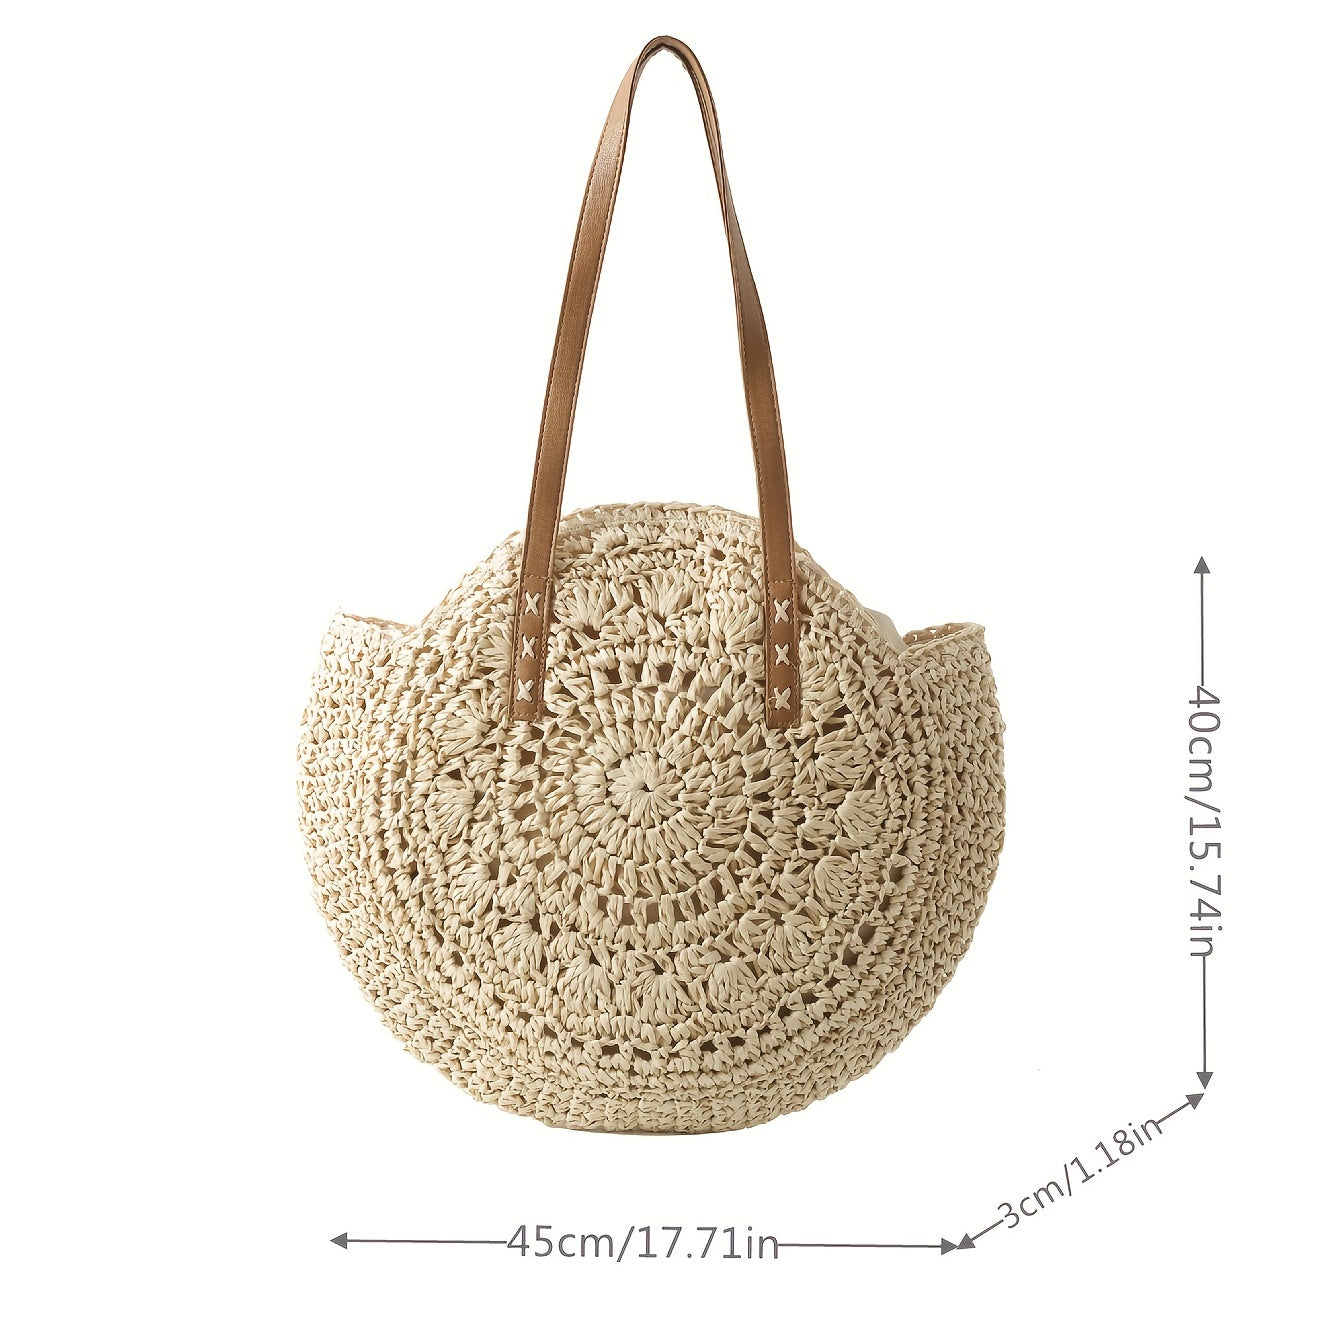 Woven Straw Round Handbags, Hollow Out Summer Beach Bag, Women's Large Capacity Shoulder Bag